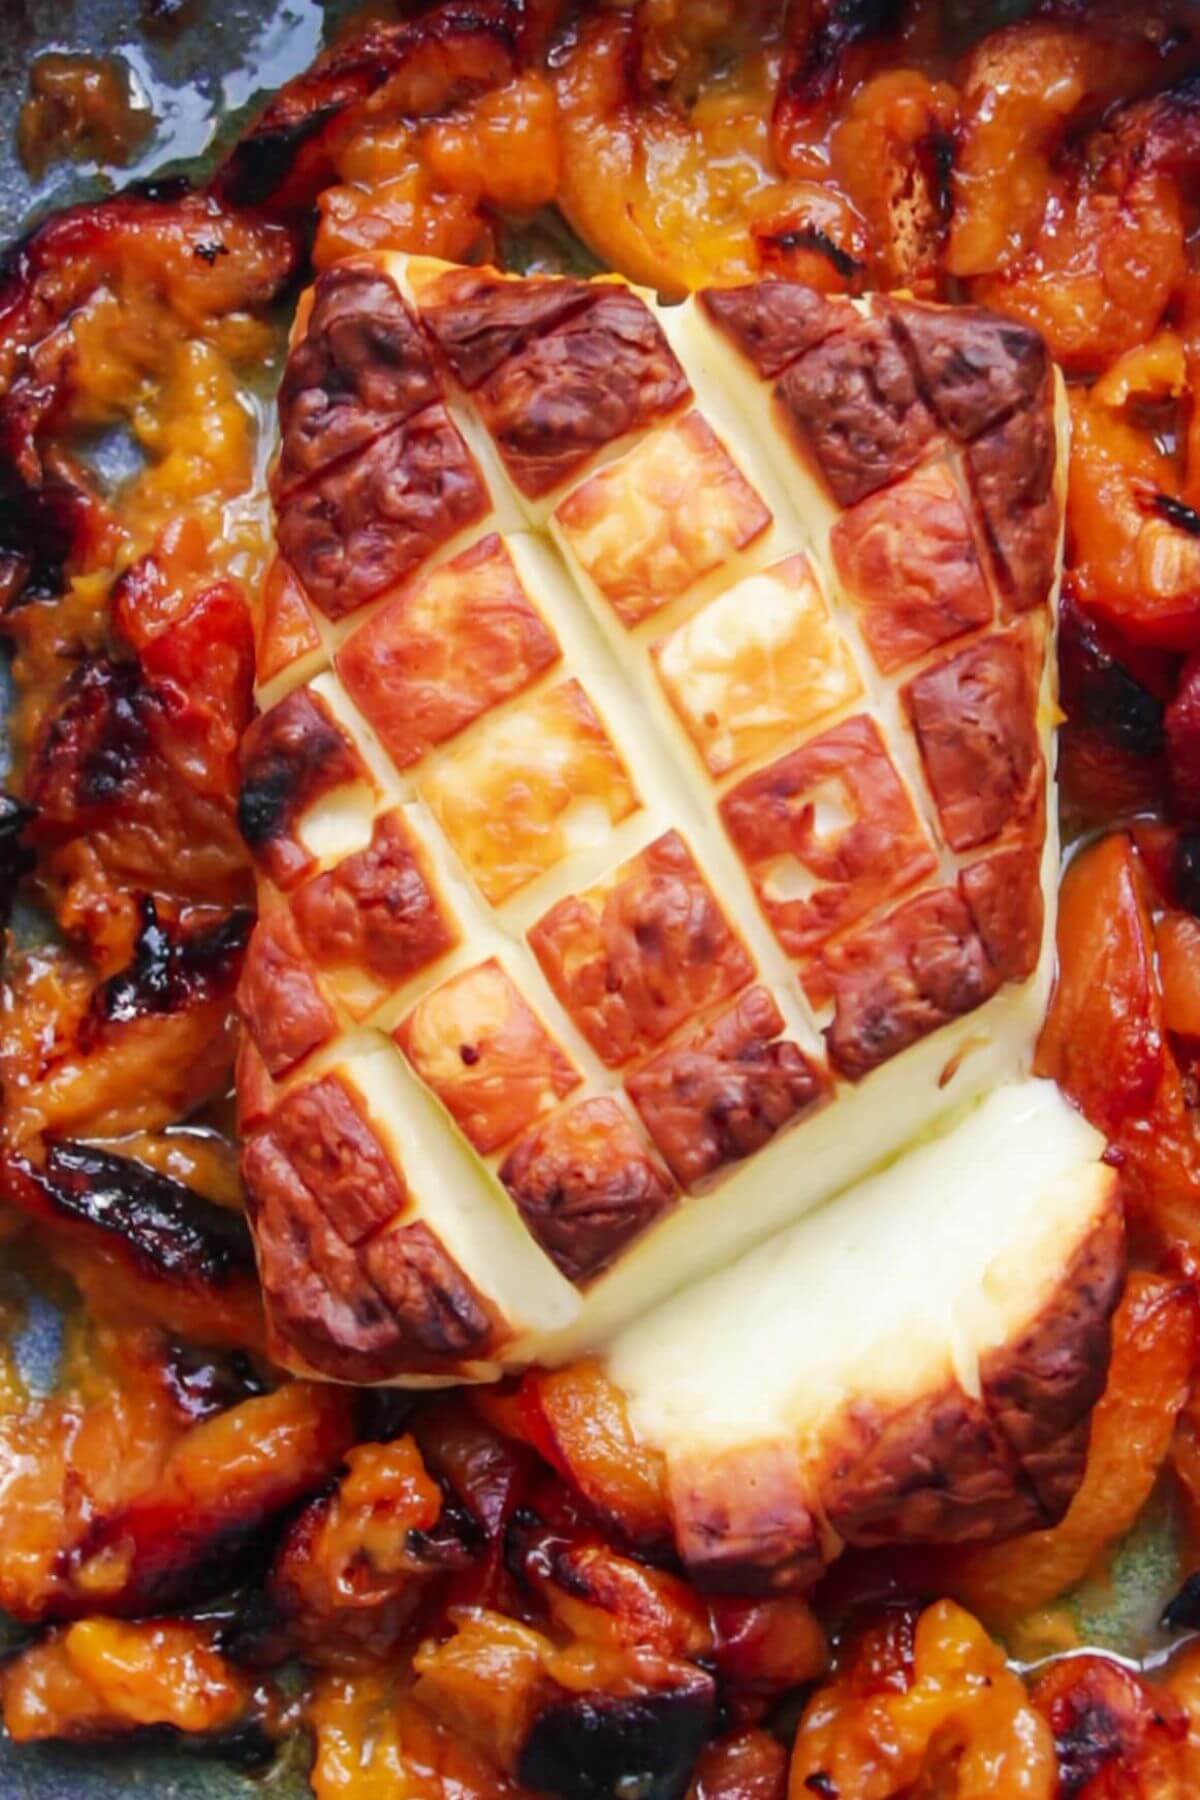 Whole baked halloumi with roasted apricots in a small blue oven dish.